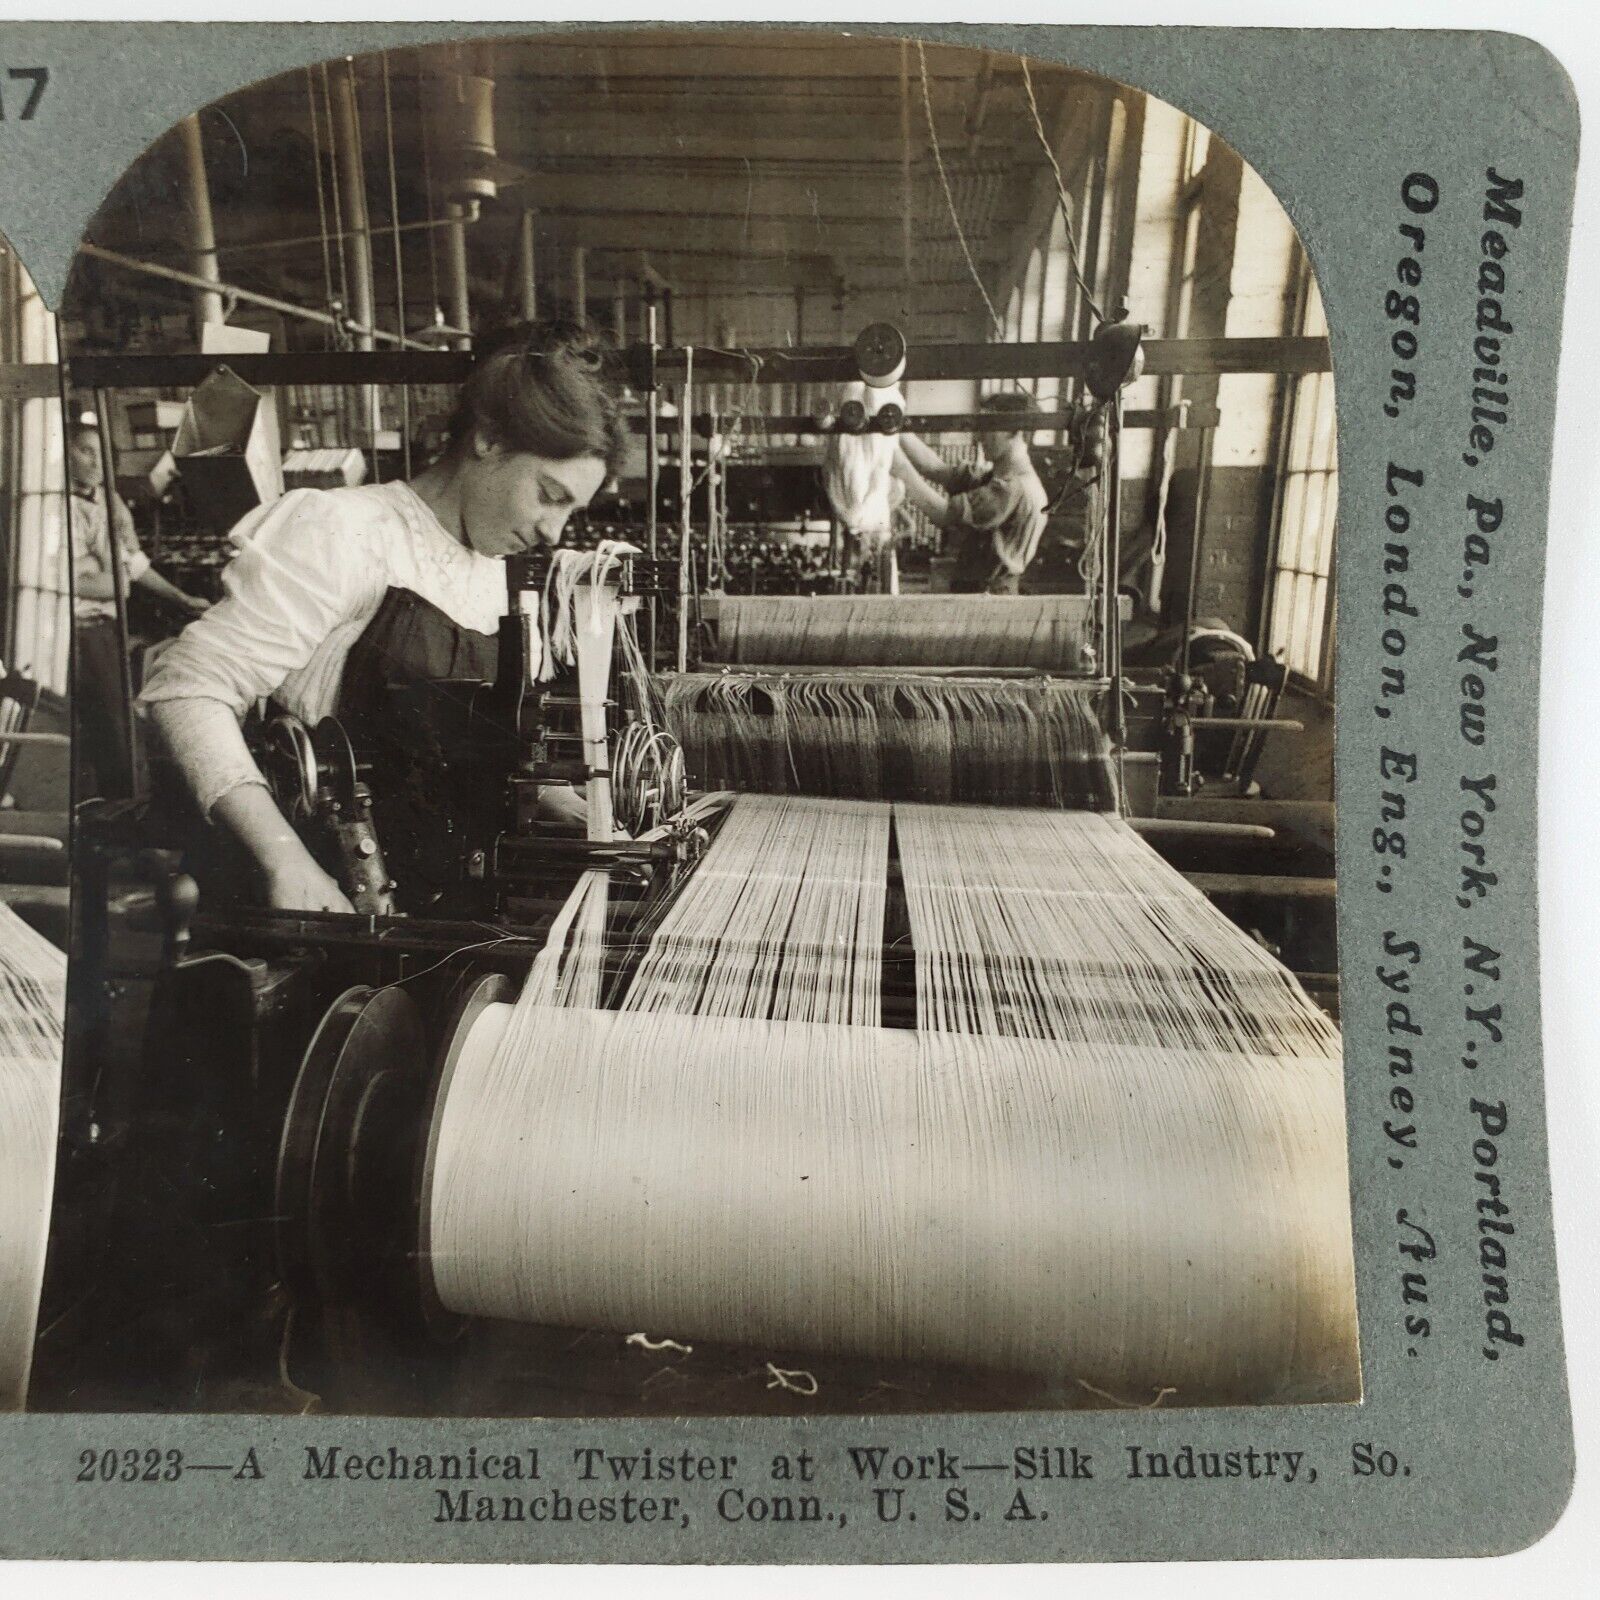 Factory Worker Twisting Silk Stereoview c1914 South Manchester Connecticut B1894